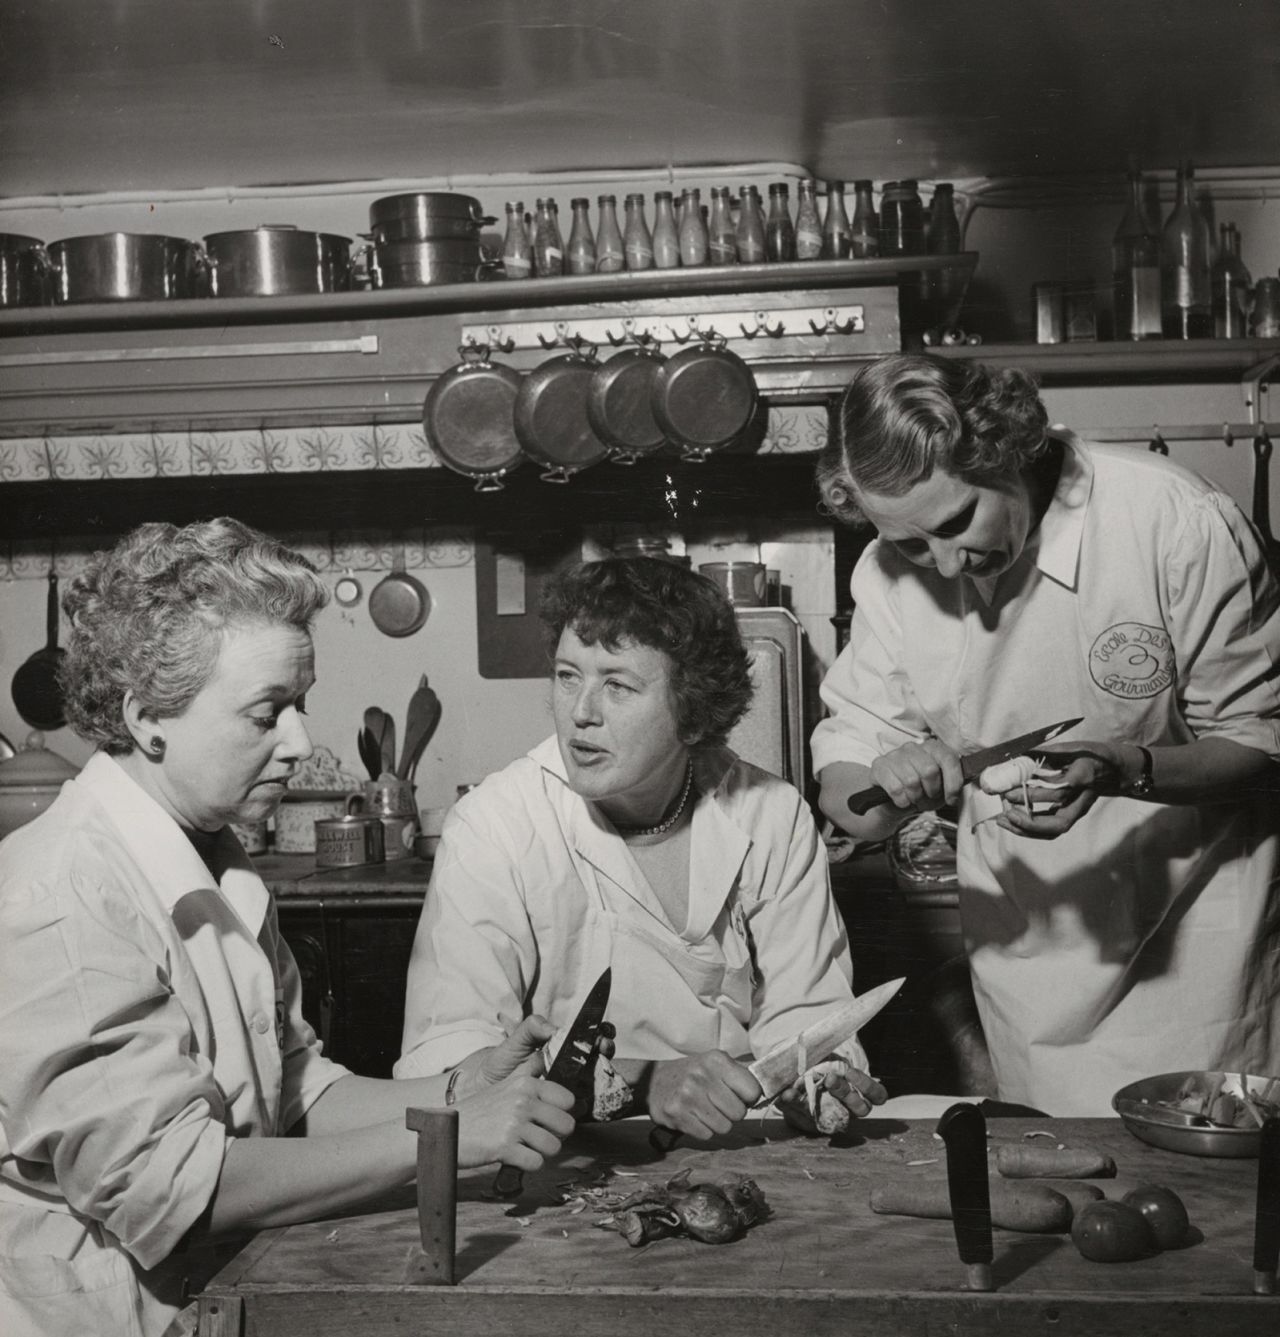 From left, Simone Beck, Child, and Louisette Bertholle peel vegetables at Ecole Des Trois Gourmandes, the cooking school they founded in Paris. The trio co-authored "Mastering the Art of French Cooking," the cookbook that launched Child's career in 1961.